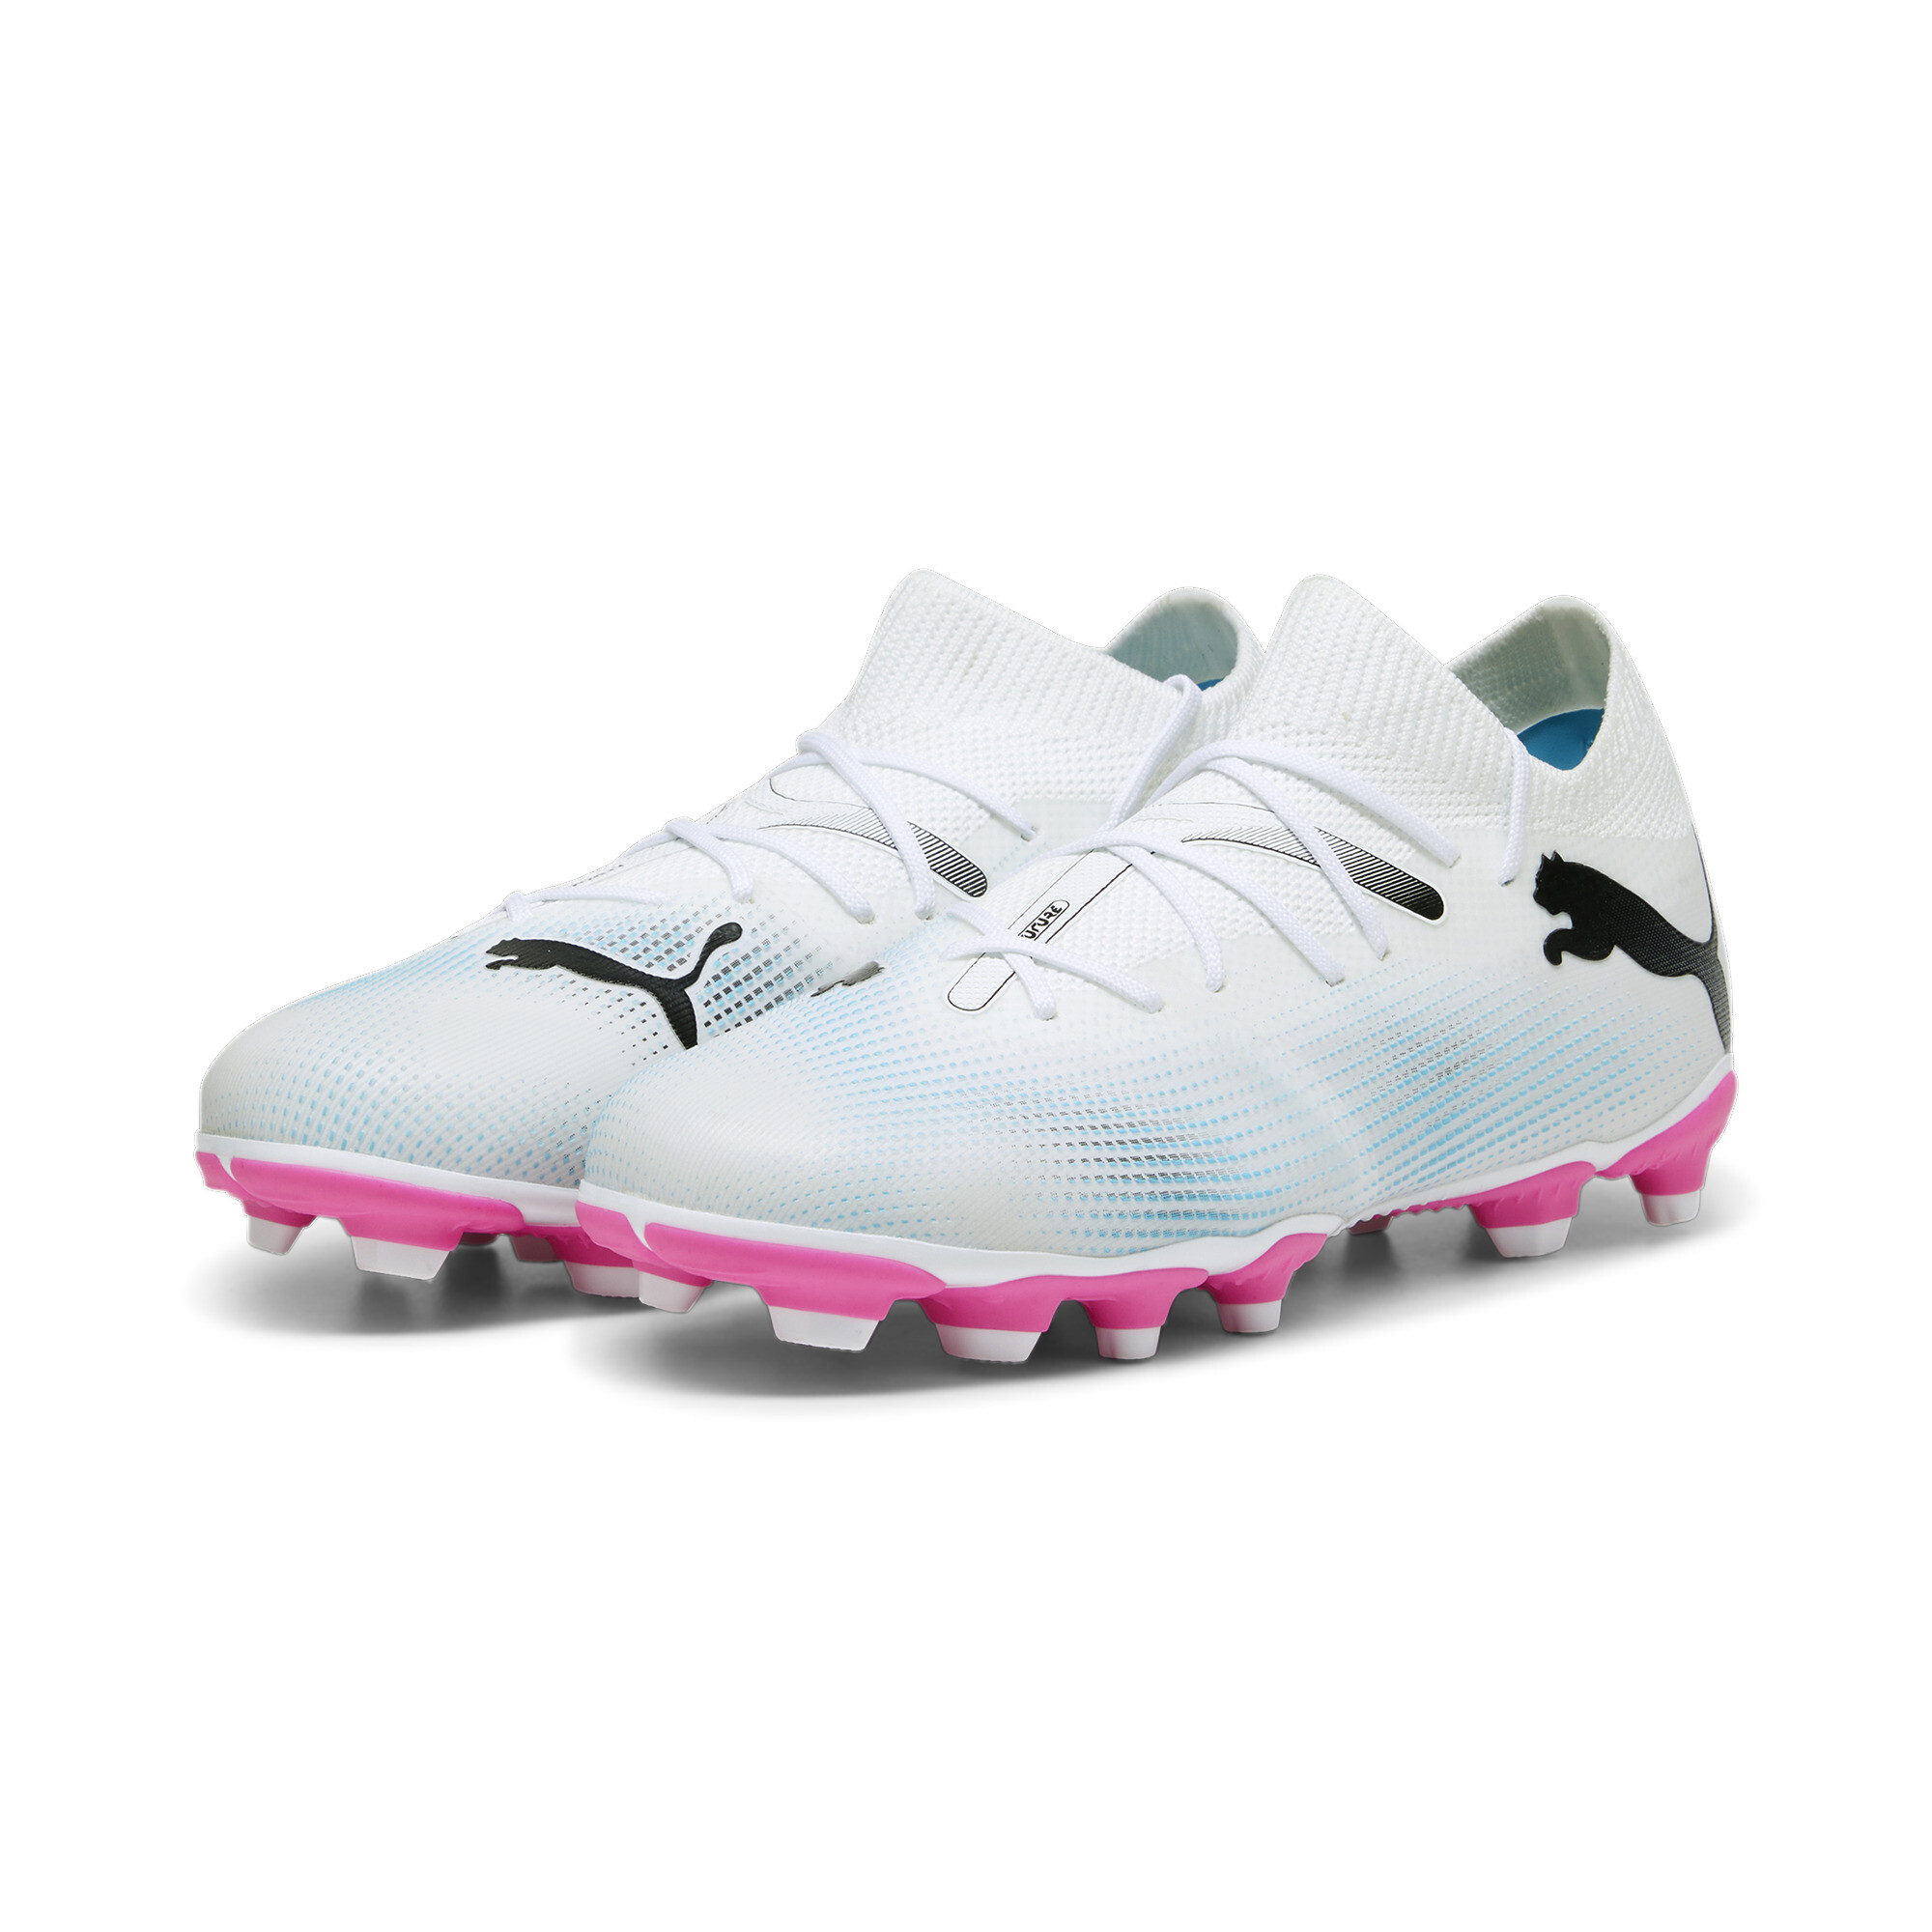 PUMA FUTURE 7 MATCH FG/AG Youth Football Boots In White/Pink, Size EU 38